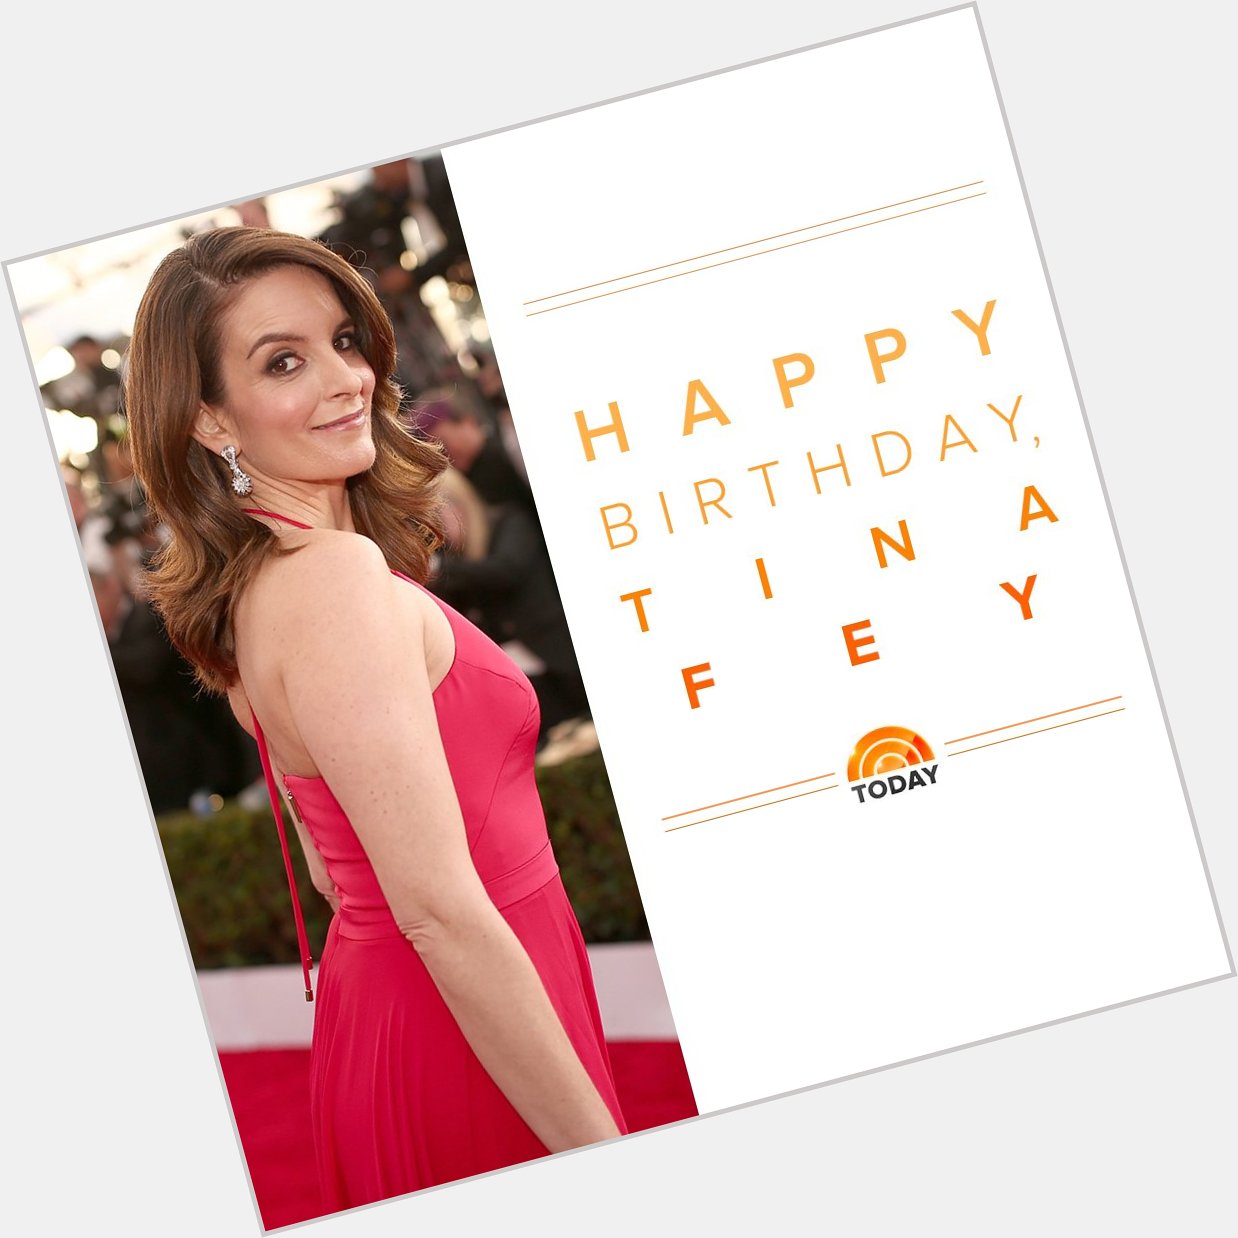 Happy birthday to one of our favorite ladies, Tina Fey! 